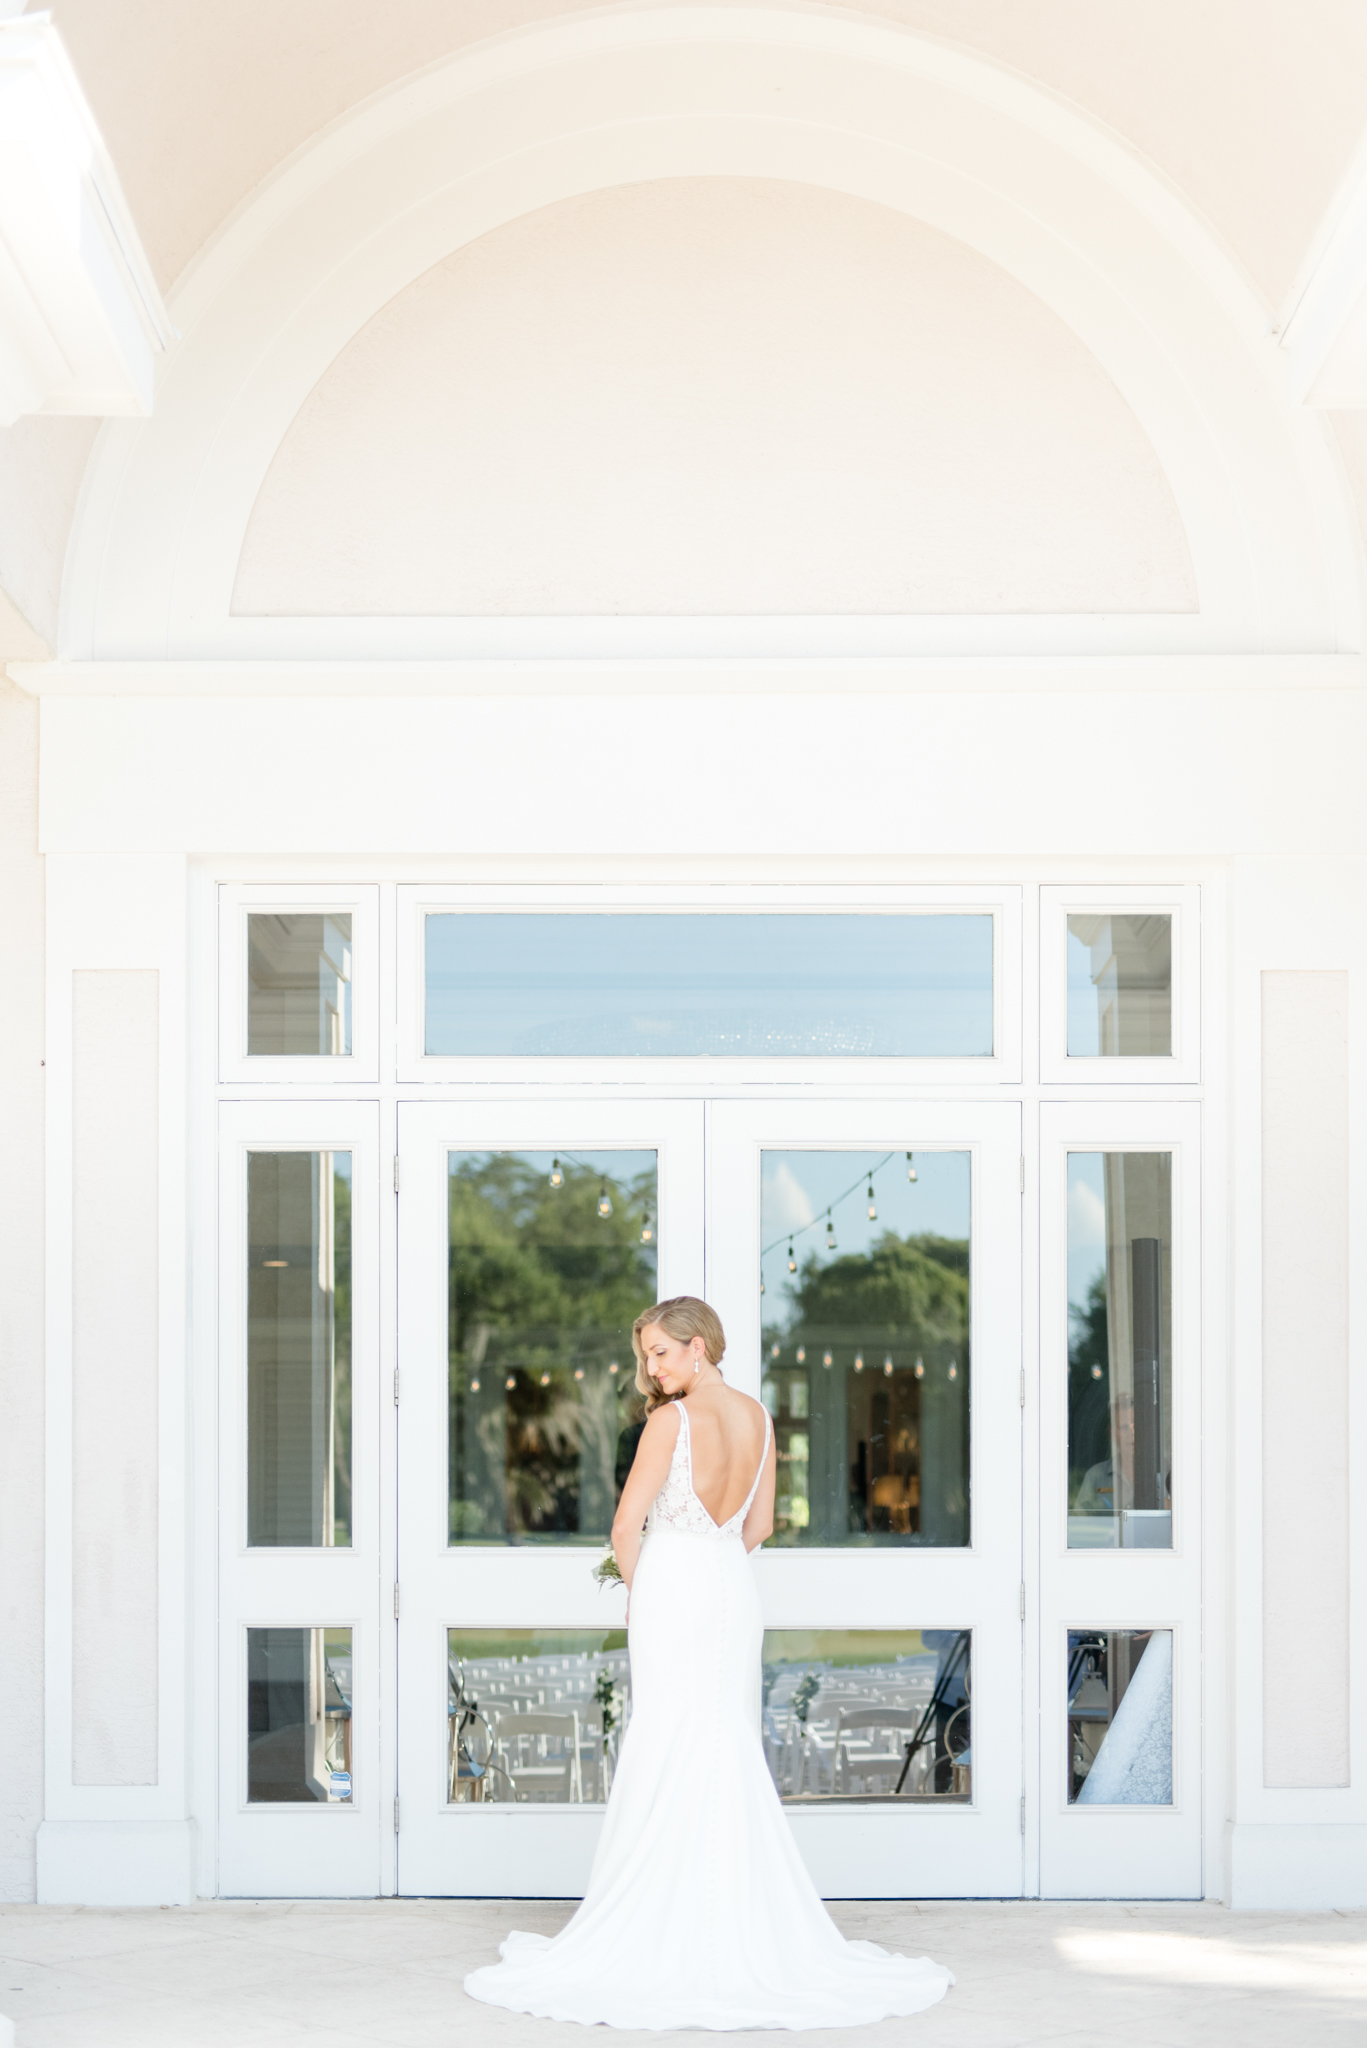 Bride stands in front of large windows.